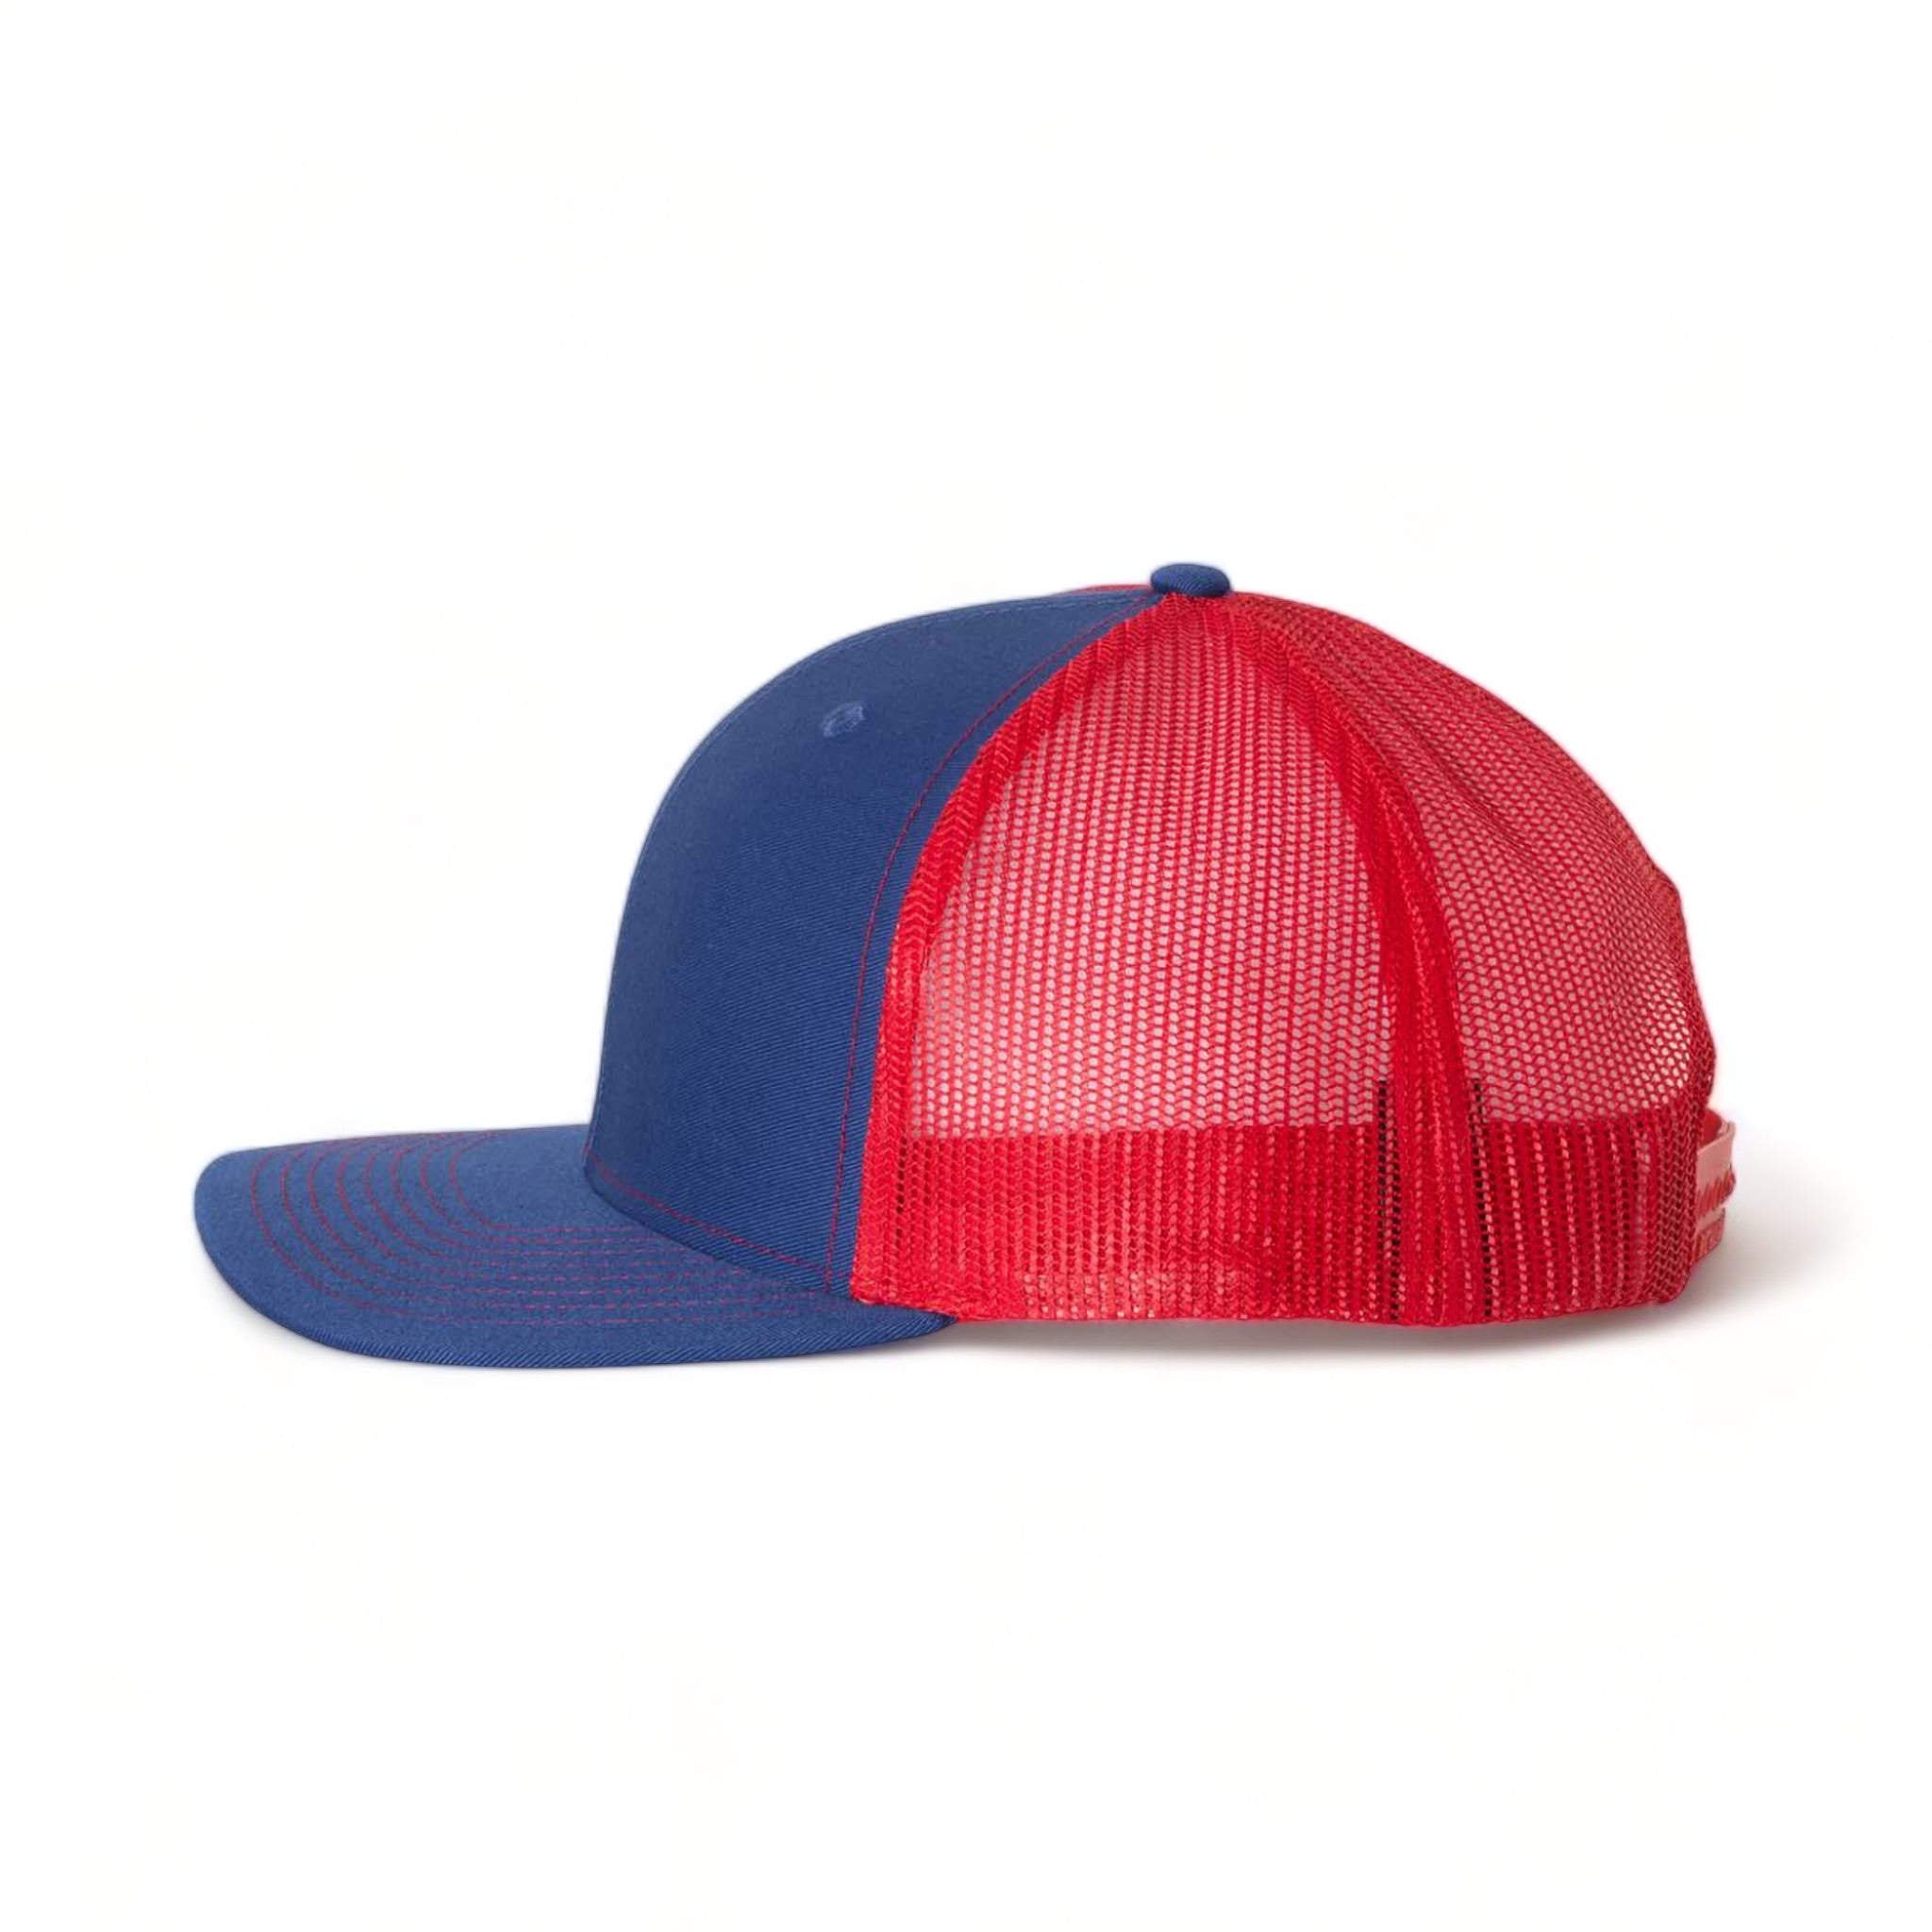 Side view of Richardson 112 custom hat in royal and red